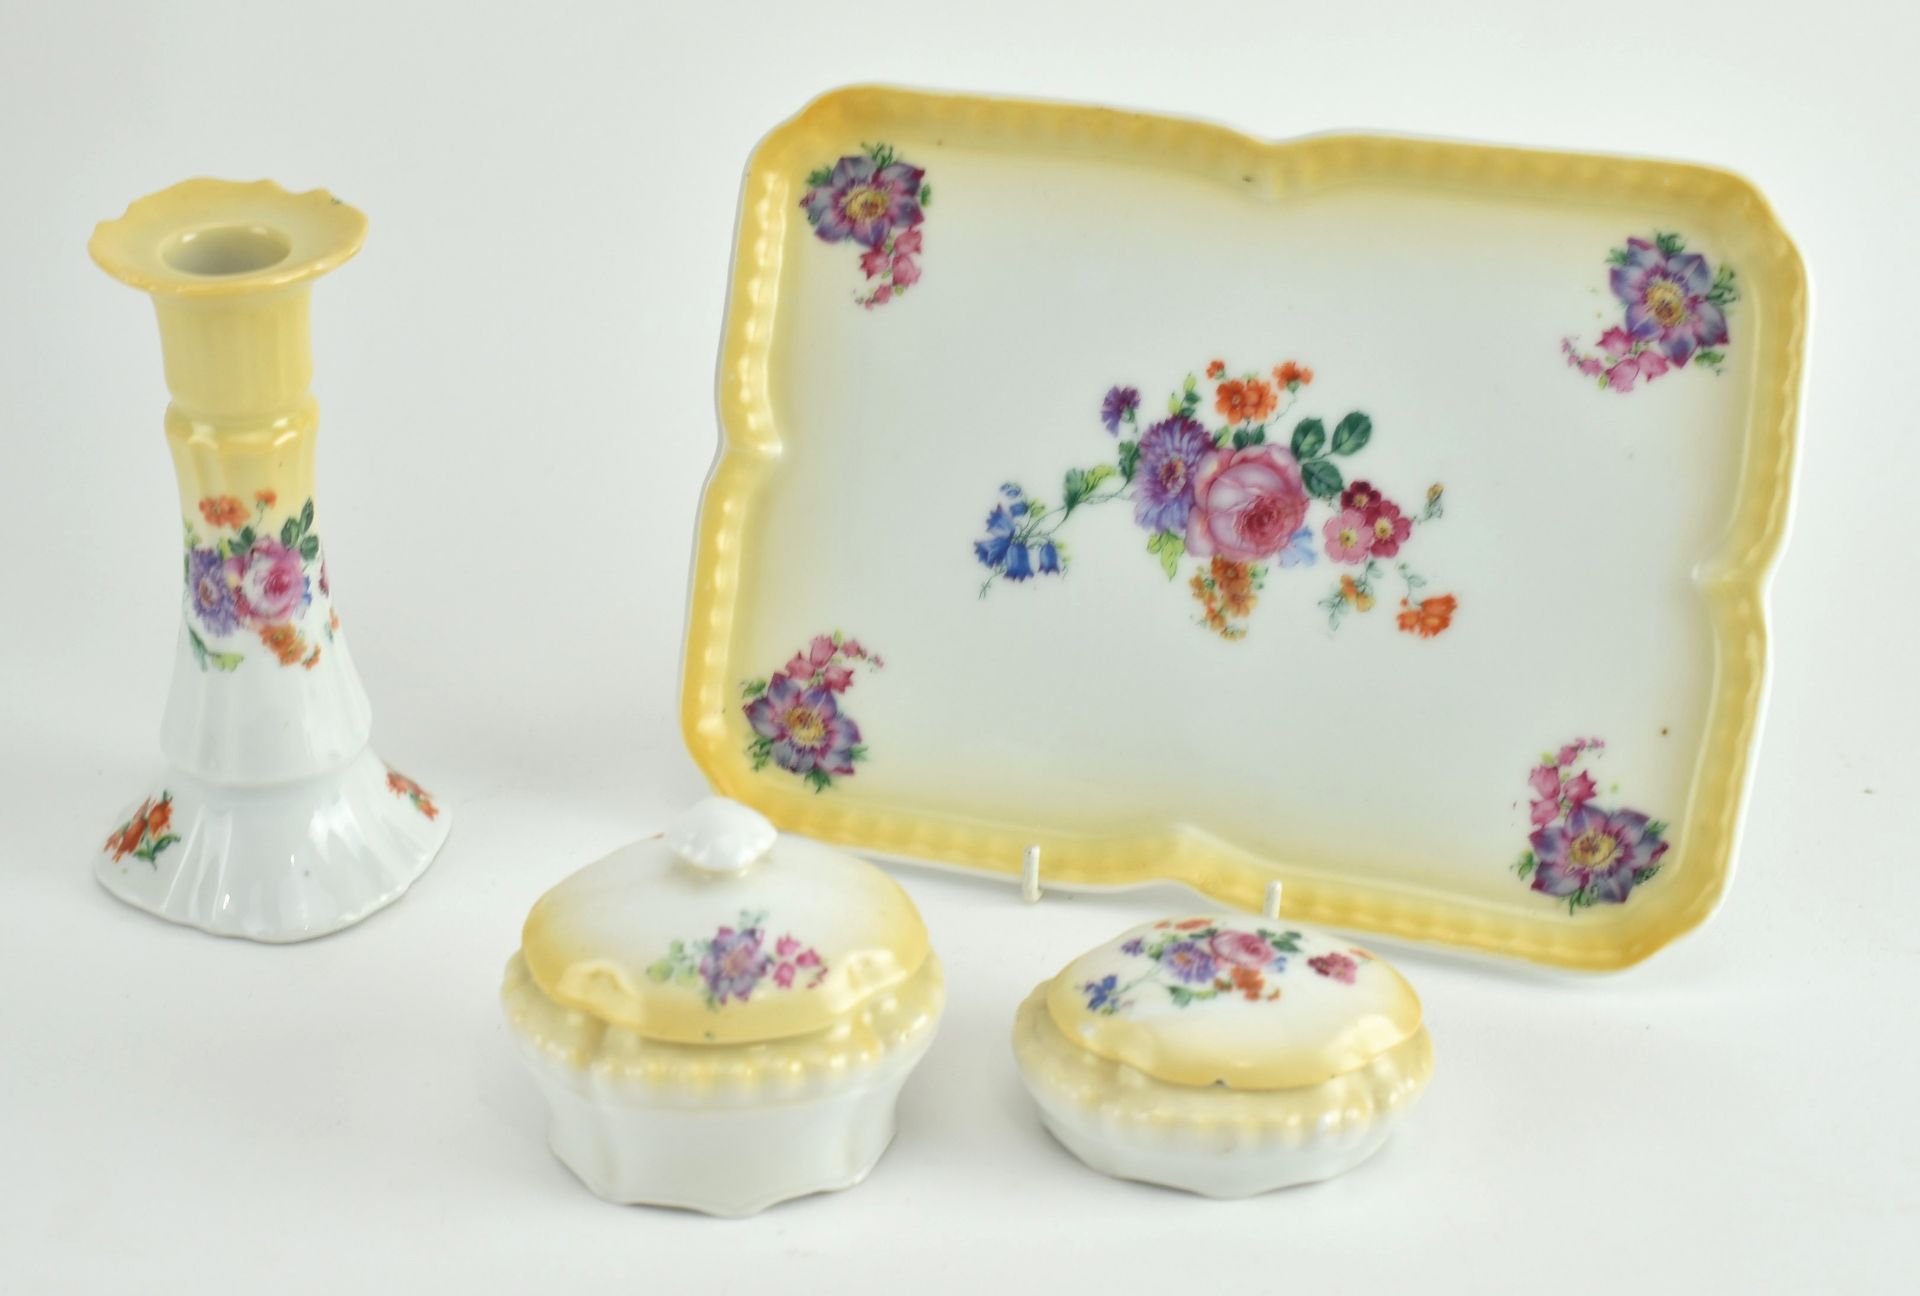 COLLECTION OF FOUR HAND PAINTED FLORAL PORCELAIN PIECES